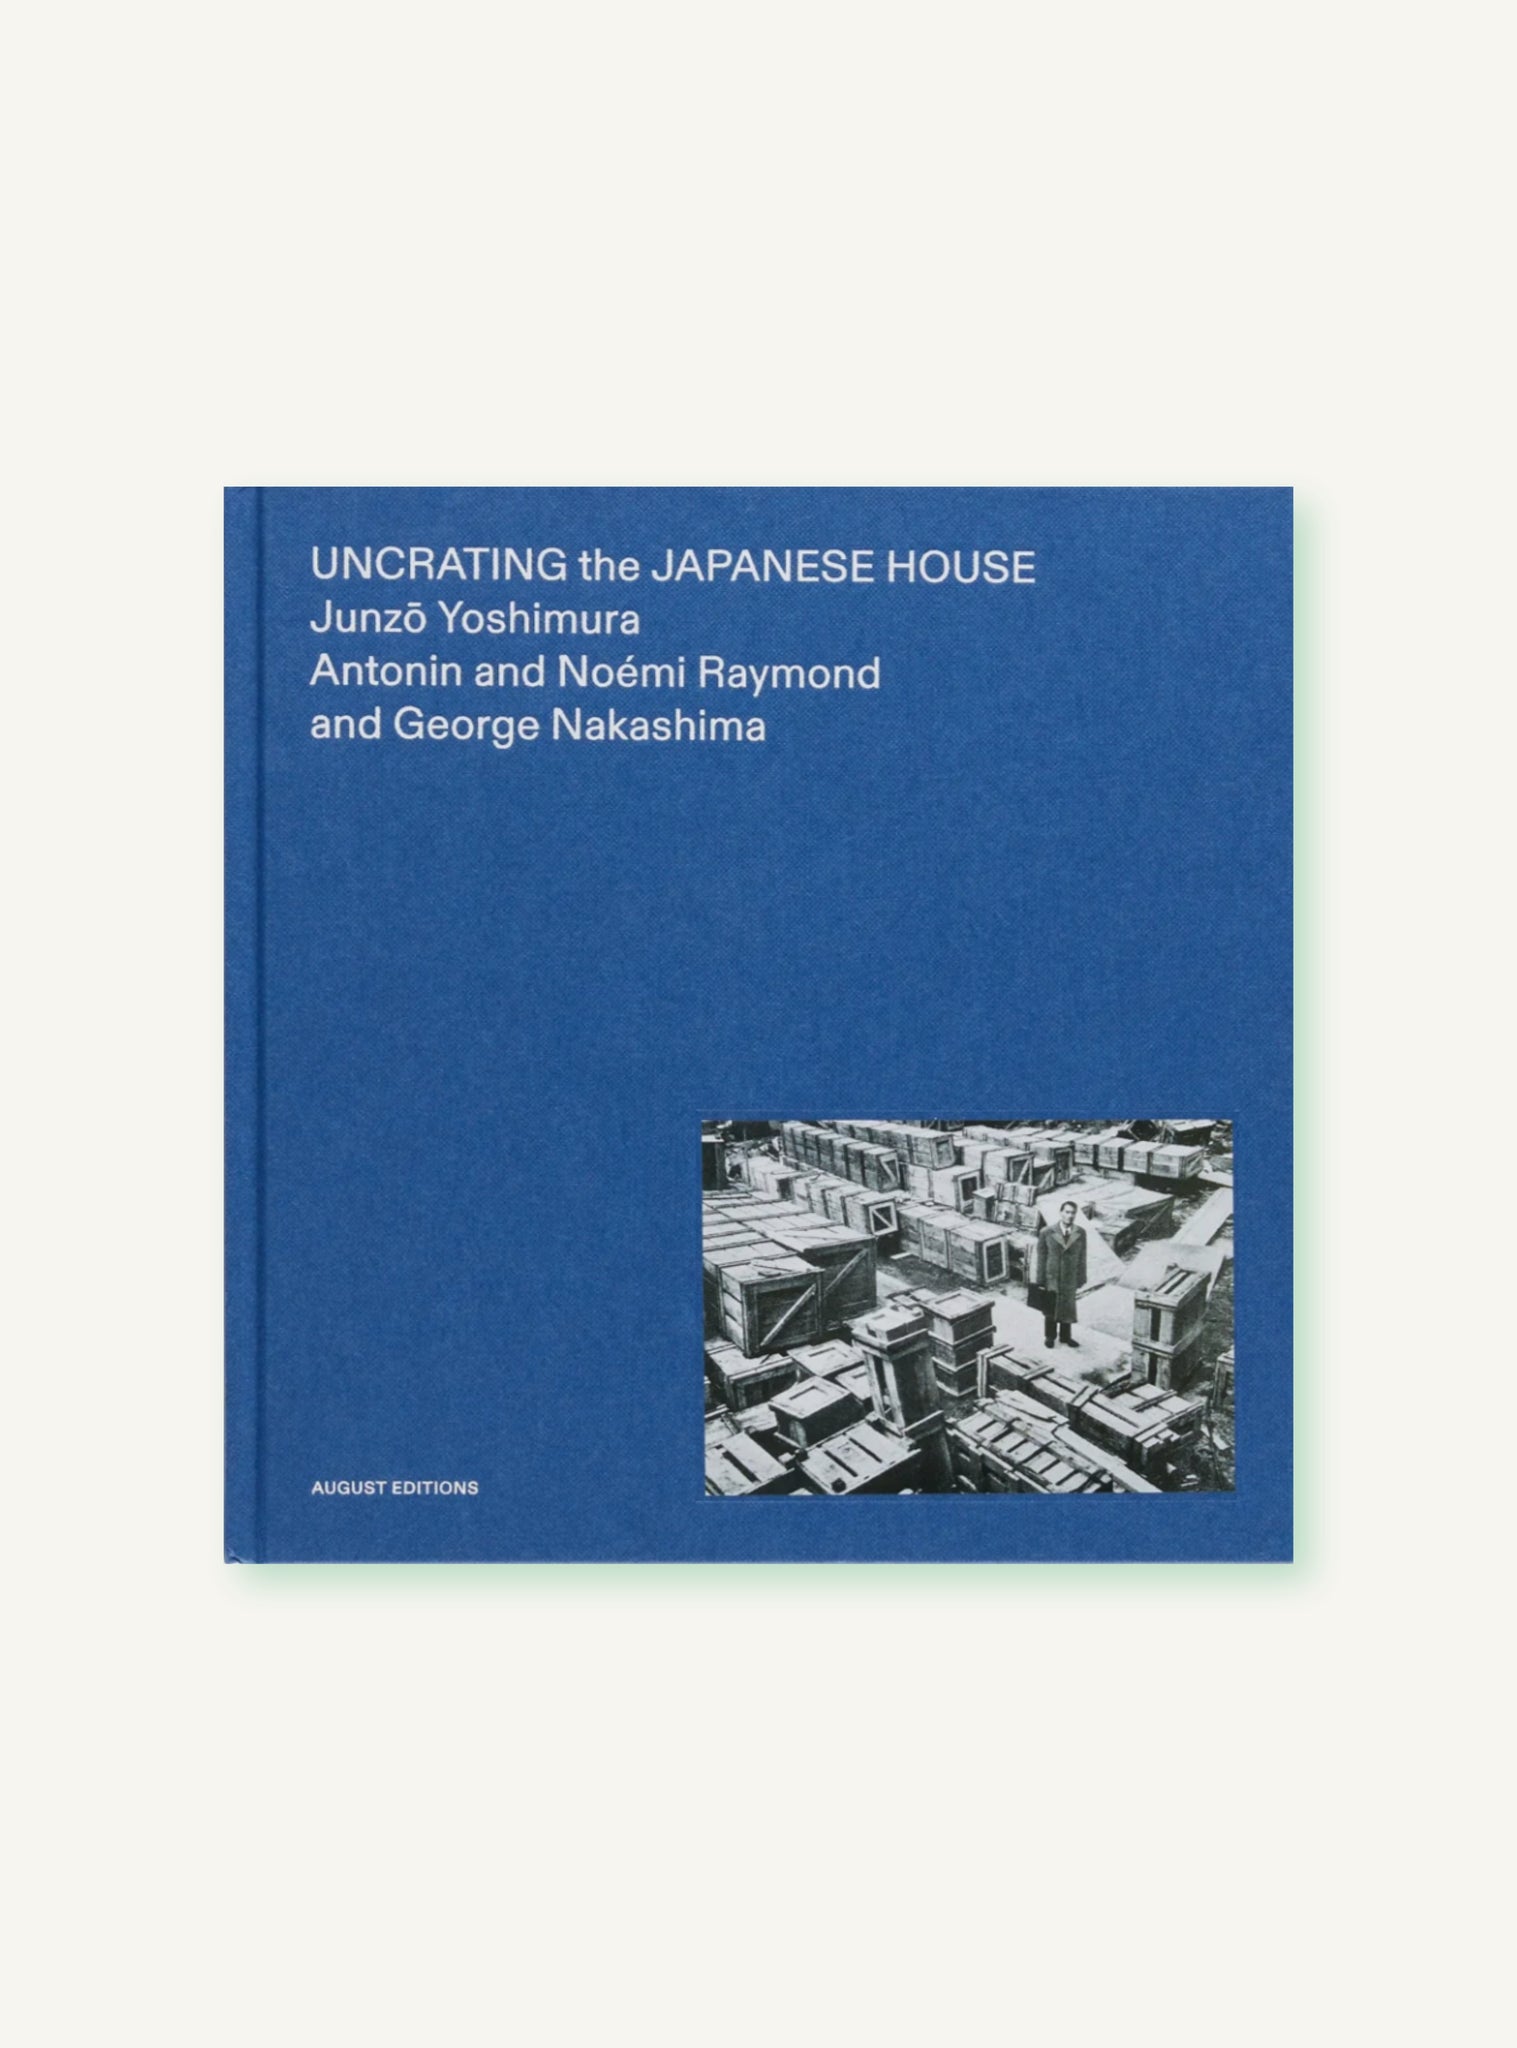 Uncrating the Japanese house